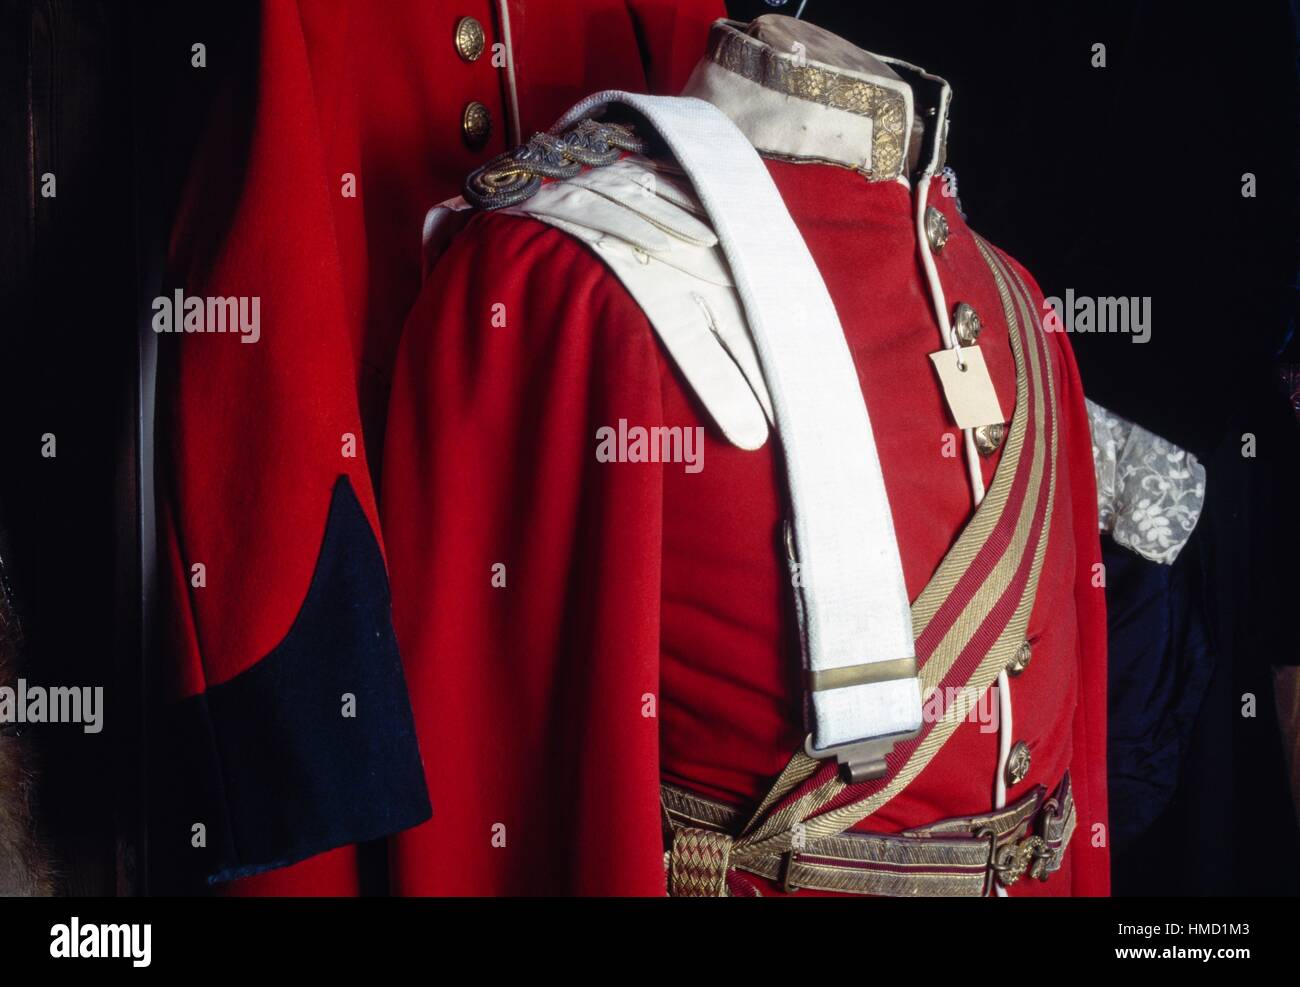 Military uniform in a pawn shop, Bygones Museum, Torbay, England, United Kingdom. Stock Photo